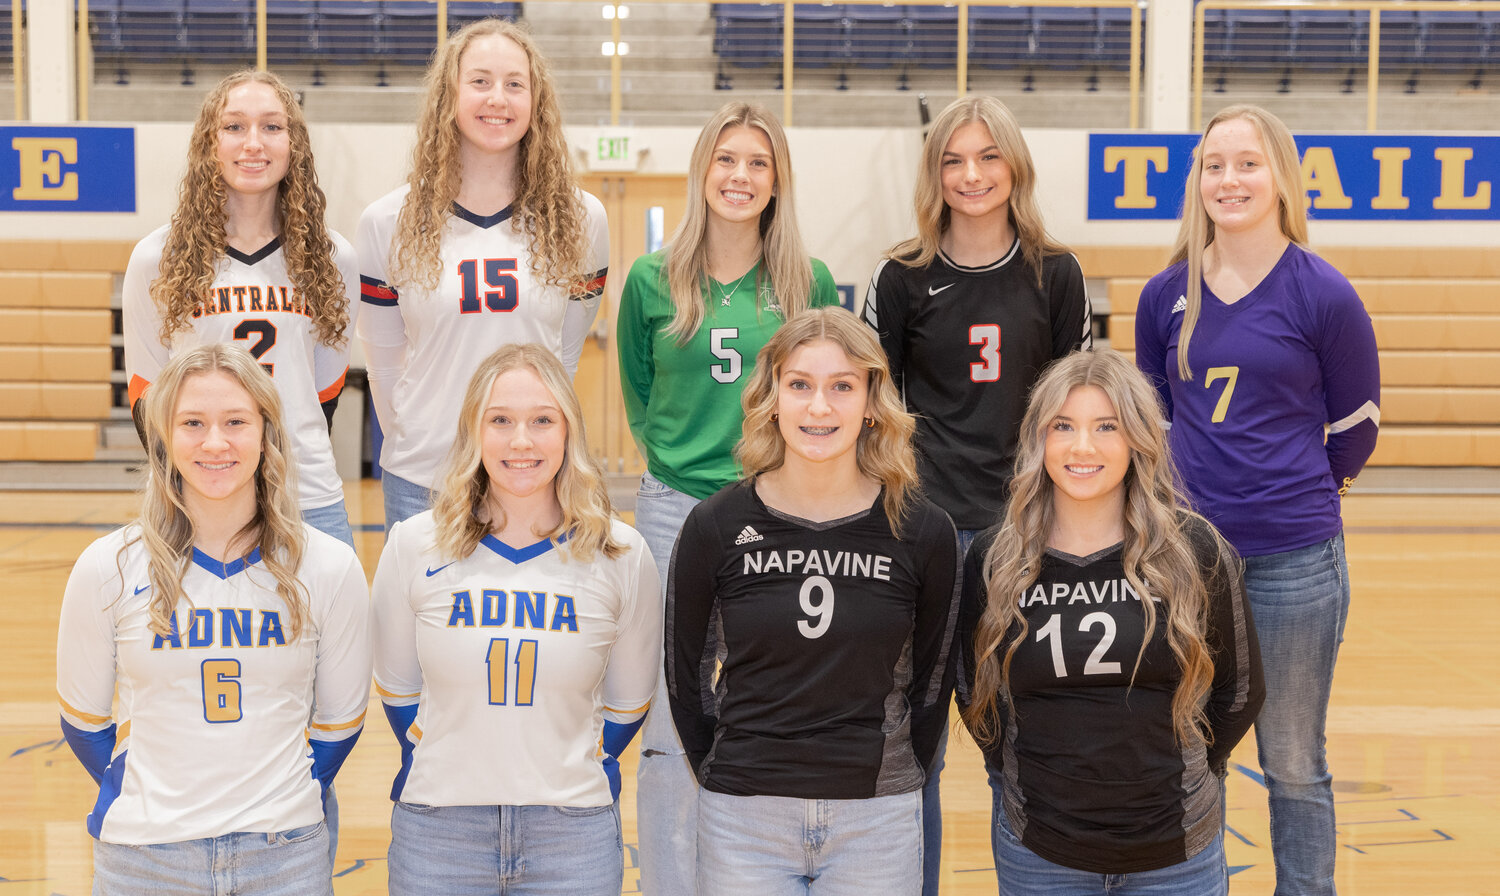 The Chronicle’s 2023 All-Area Volleyball Team poses for a photo on Wednesday, Dec. 6, at Centralia College. In the front row, from left: Adna’s Karsyn Freeman and Kendall Humphrey and Napavine’s Keira O’Neill and Dakota Hamilton. in the back row, from left: Centralia’s Lauren Wasson, Black Hills’ Ashley Harris, Tumwater’s Brooklynn Hayes, Mossyrock’s Erin Cournyer and Onalaska’s Emalie Jacoby. Not pictured: Rainier’s Allyson Ooms.